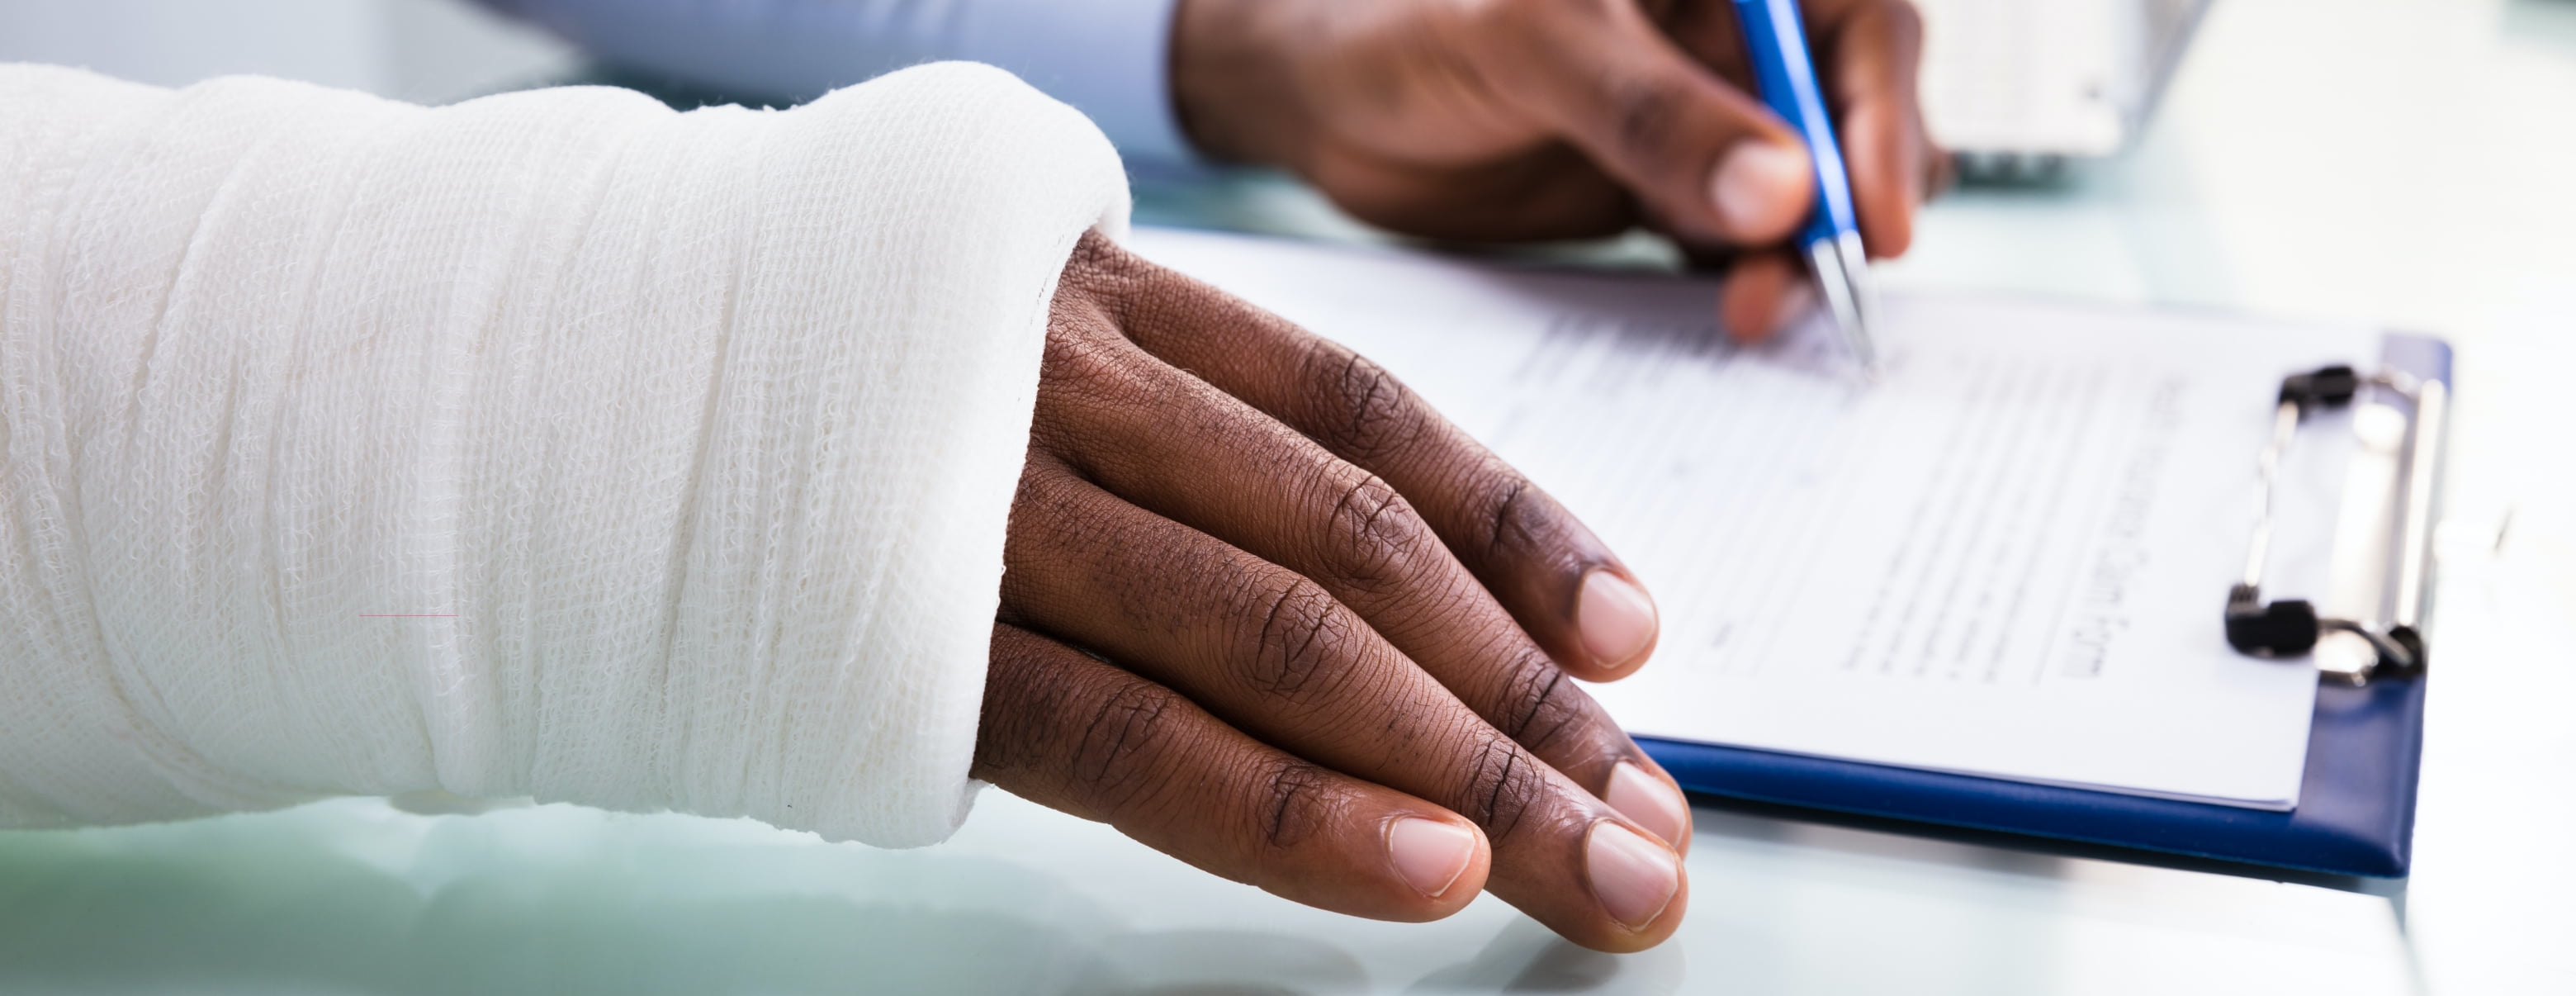 Hand injured in workers' compensation claim